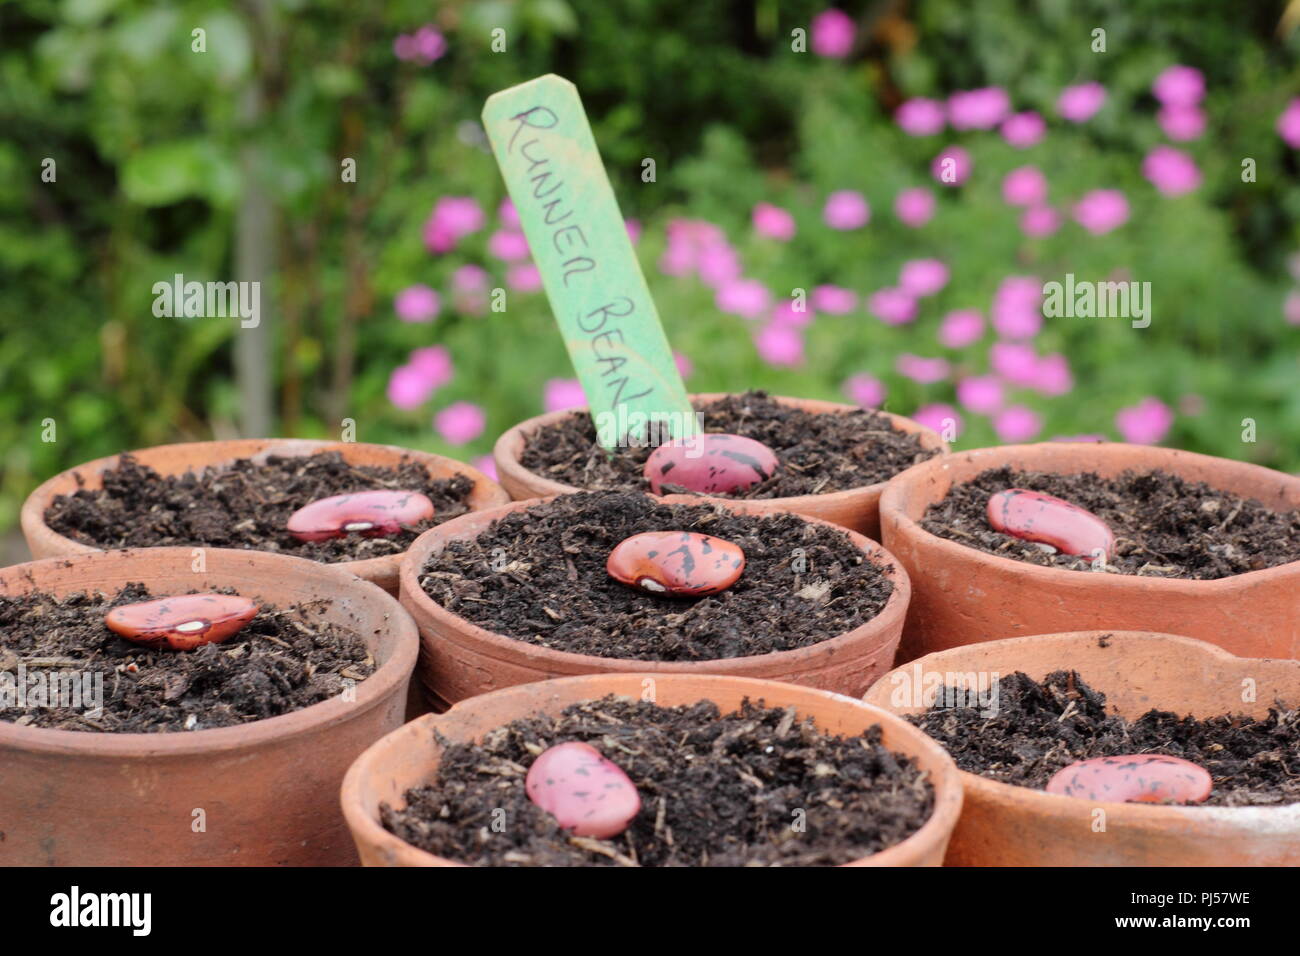 Phaseolus coccineus. Sowing runner bean 'Enorma' seeds in clay pots, UK. Enorma variety. Stock Photo